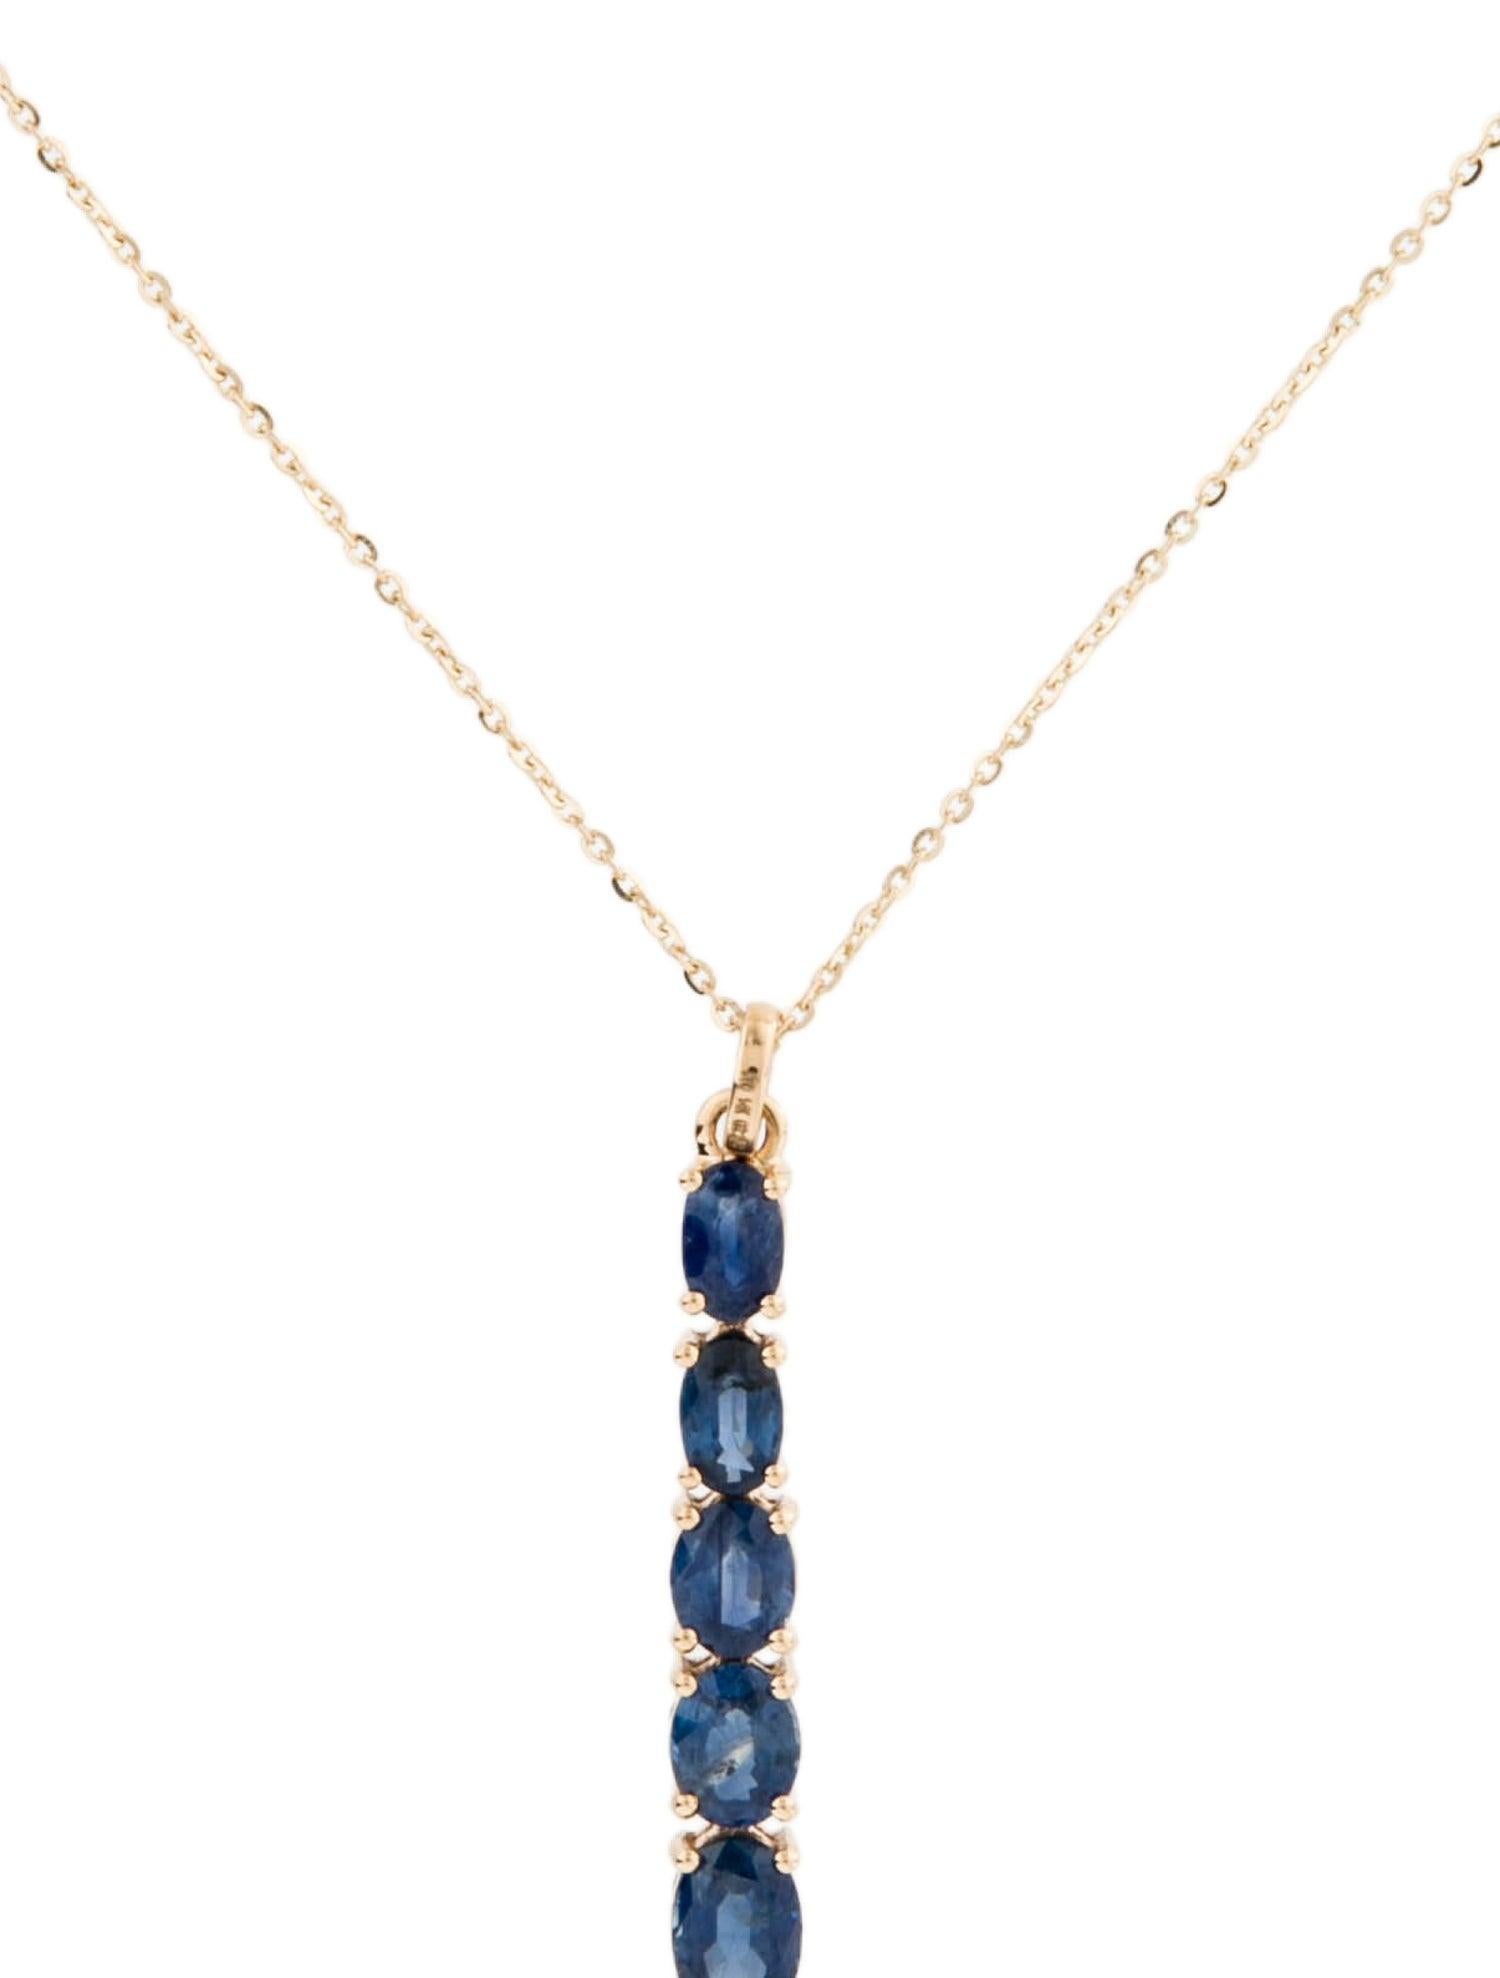 14K 2.08ctw Sapphire Pendant Necklace: Elegant Luxury Statement Piece, Timeless In New Condition For Sale In Holtsville, NY